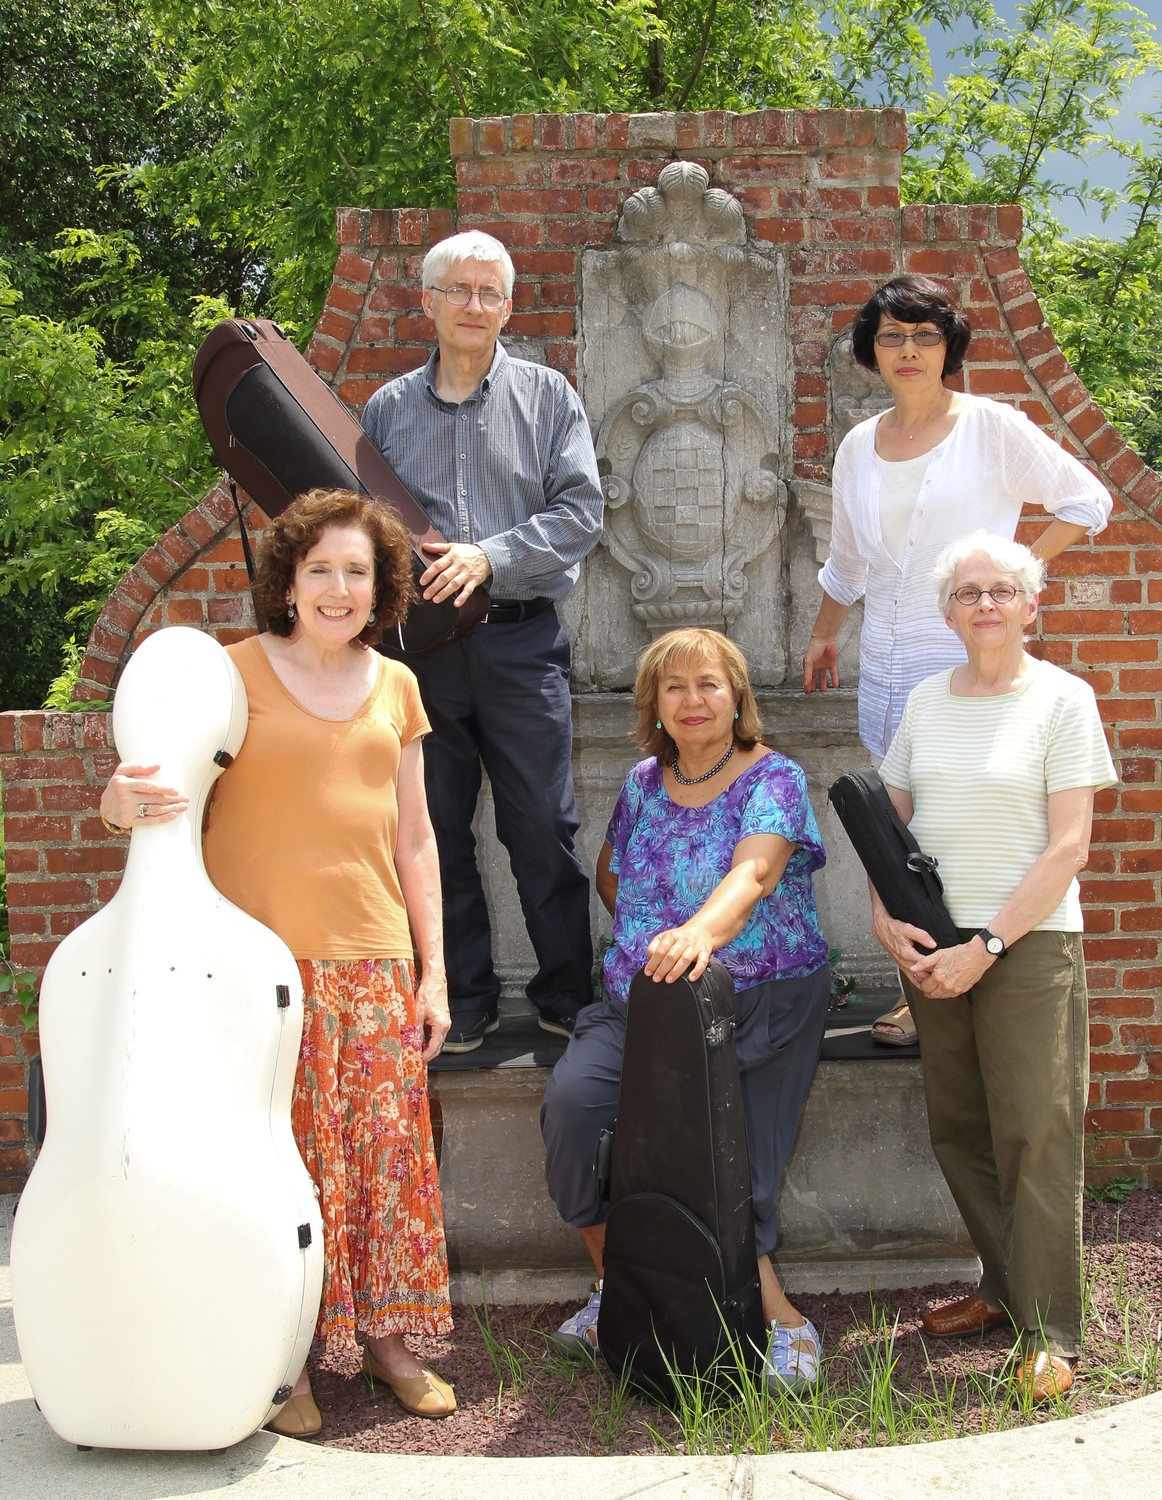 The dynamic Pierrot Consort opens the festival's 37th edition.